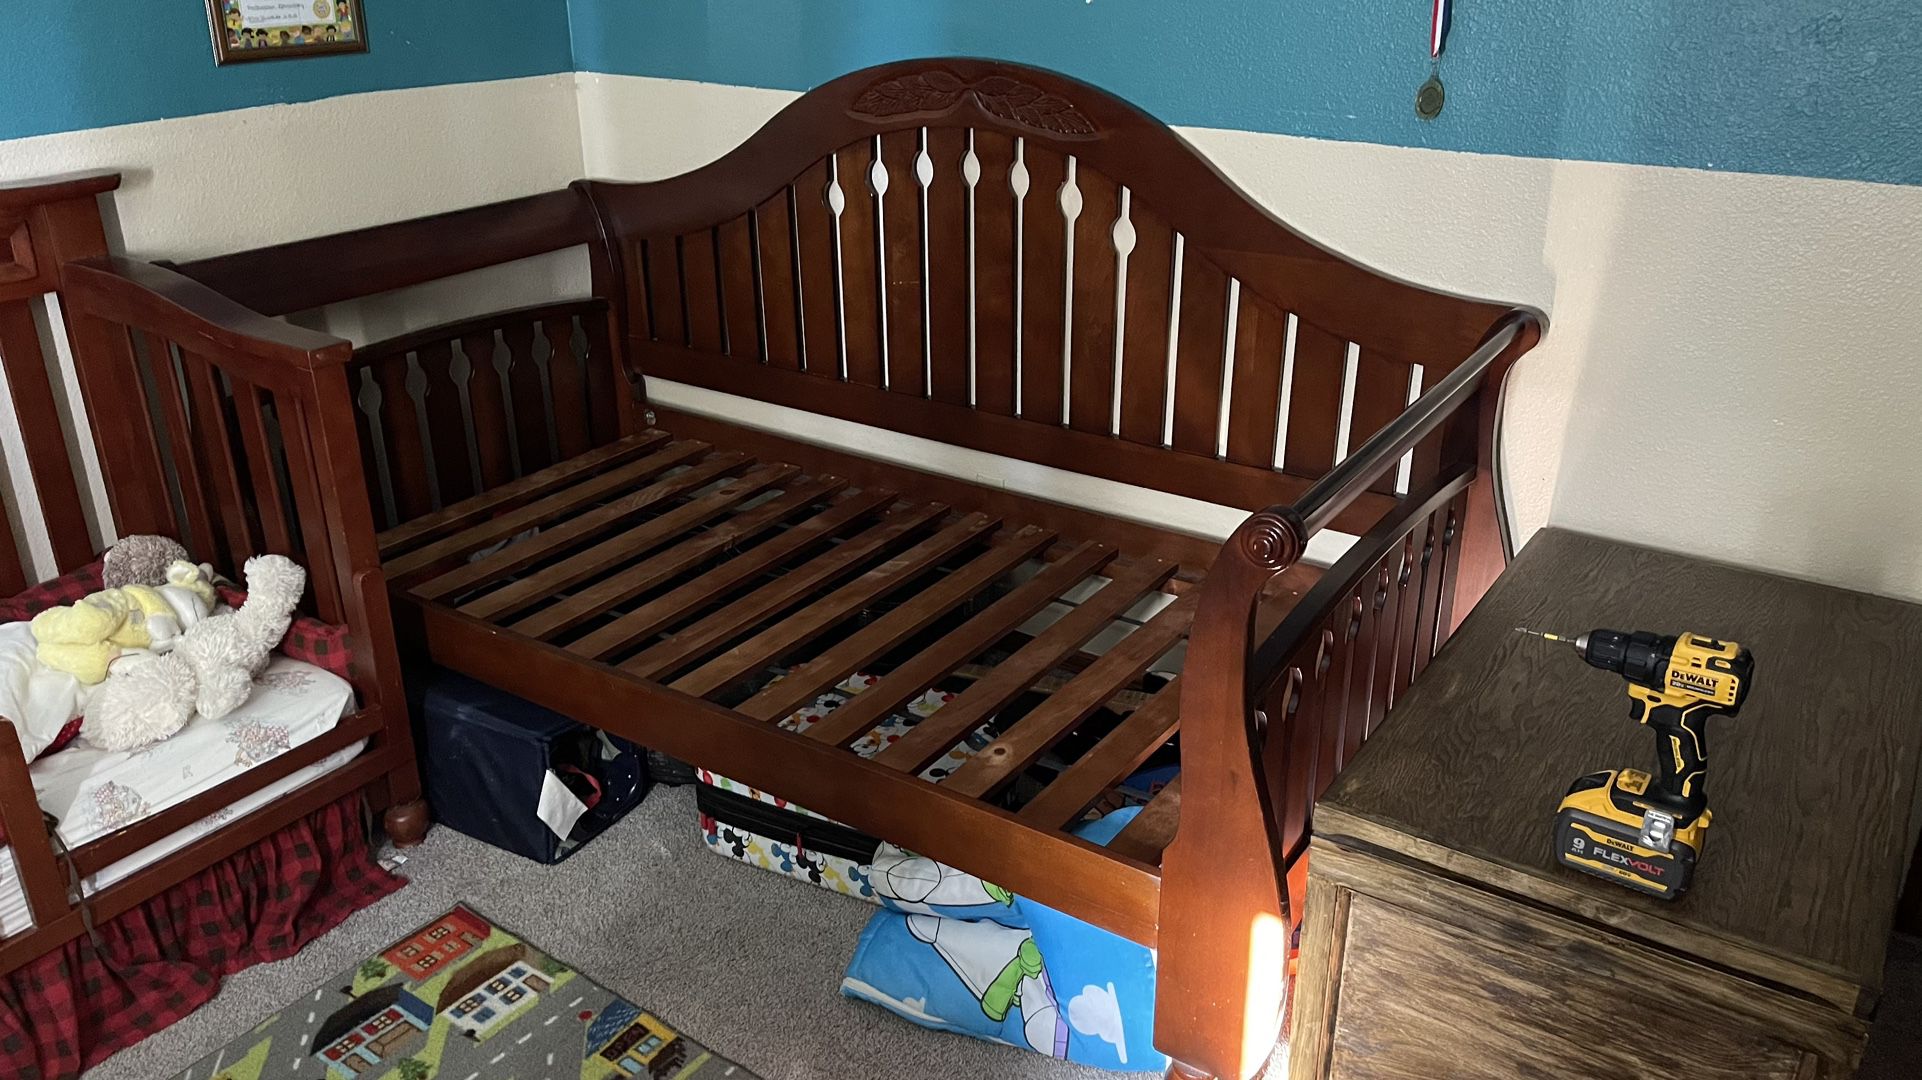 Twin Bed-frame for sale $40